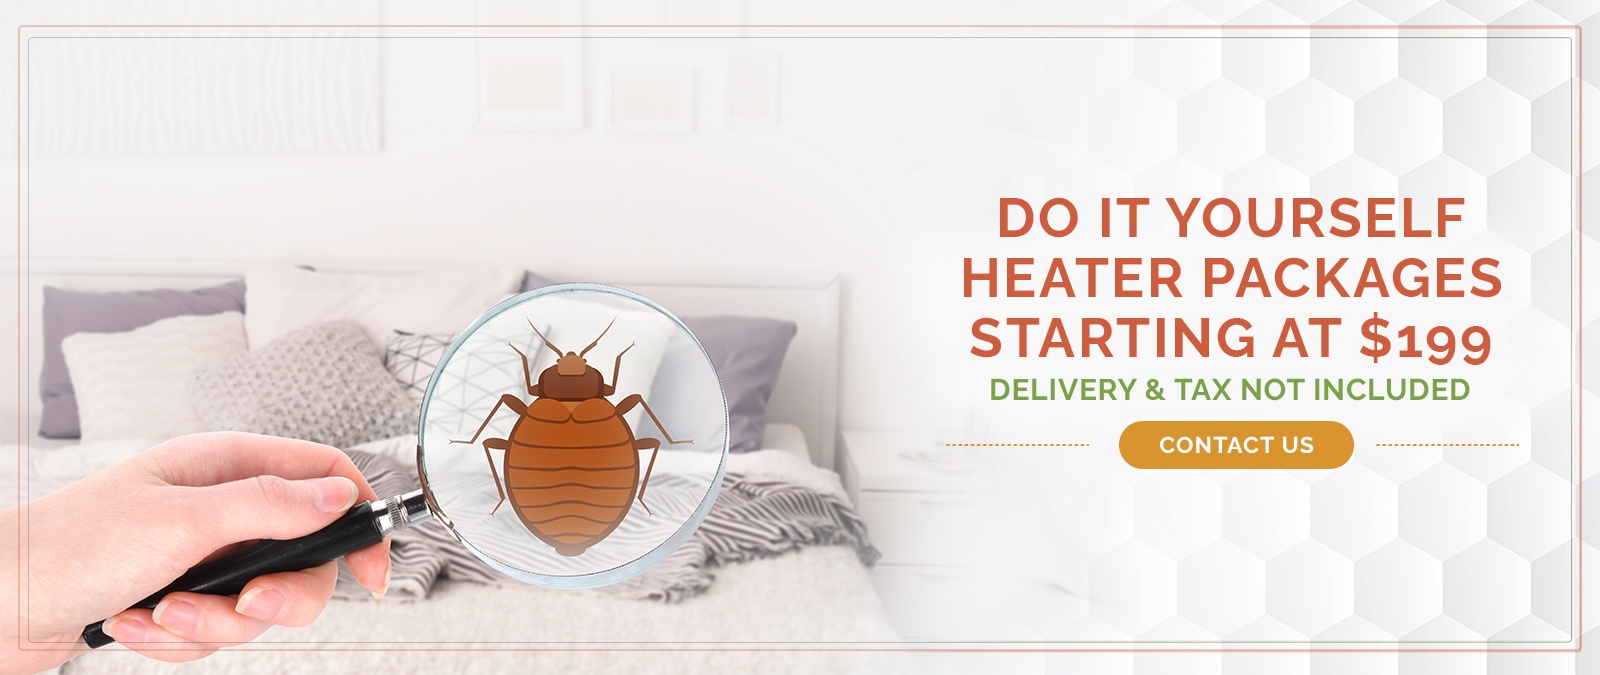 Bed Bug Heater Rental Services in Houston, Texas by Houston Bed Bug Heaters